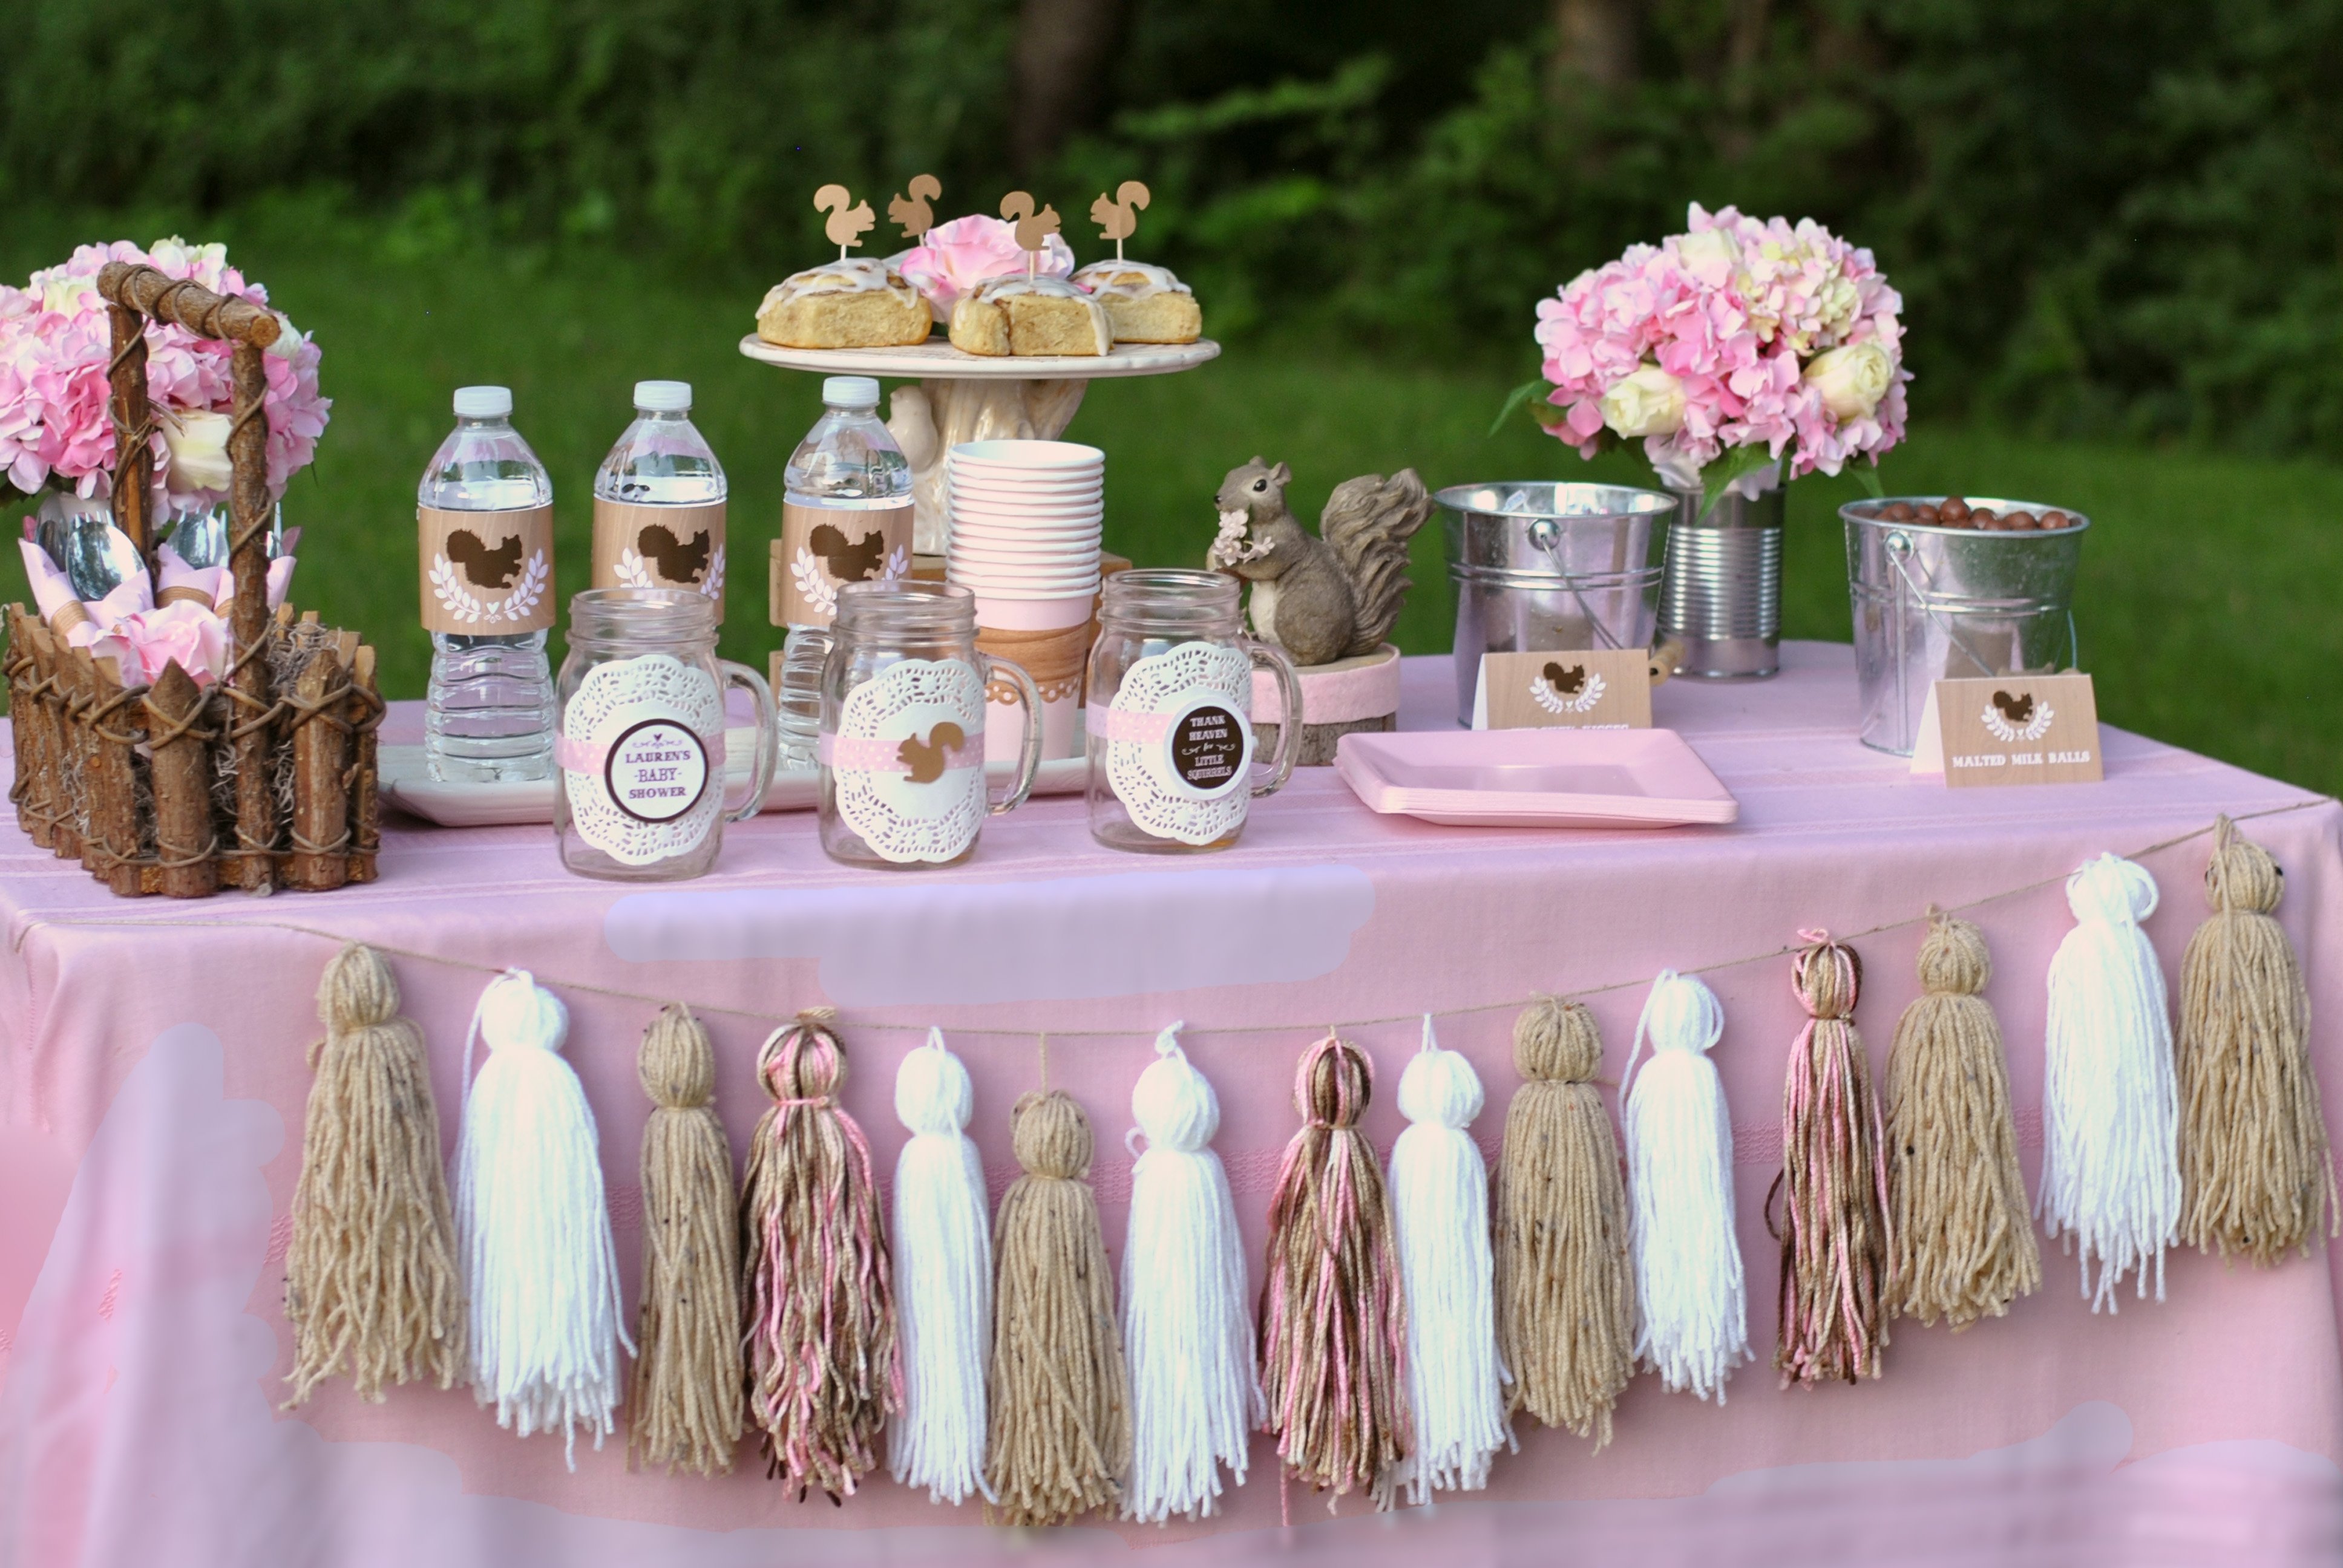 10 Awesome Girl Themed Baby Shower Ideas baby shower theme ideas for girl omega center ideas for baby 7 2022